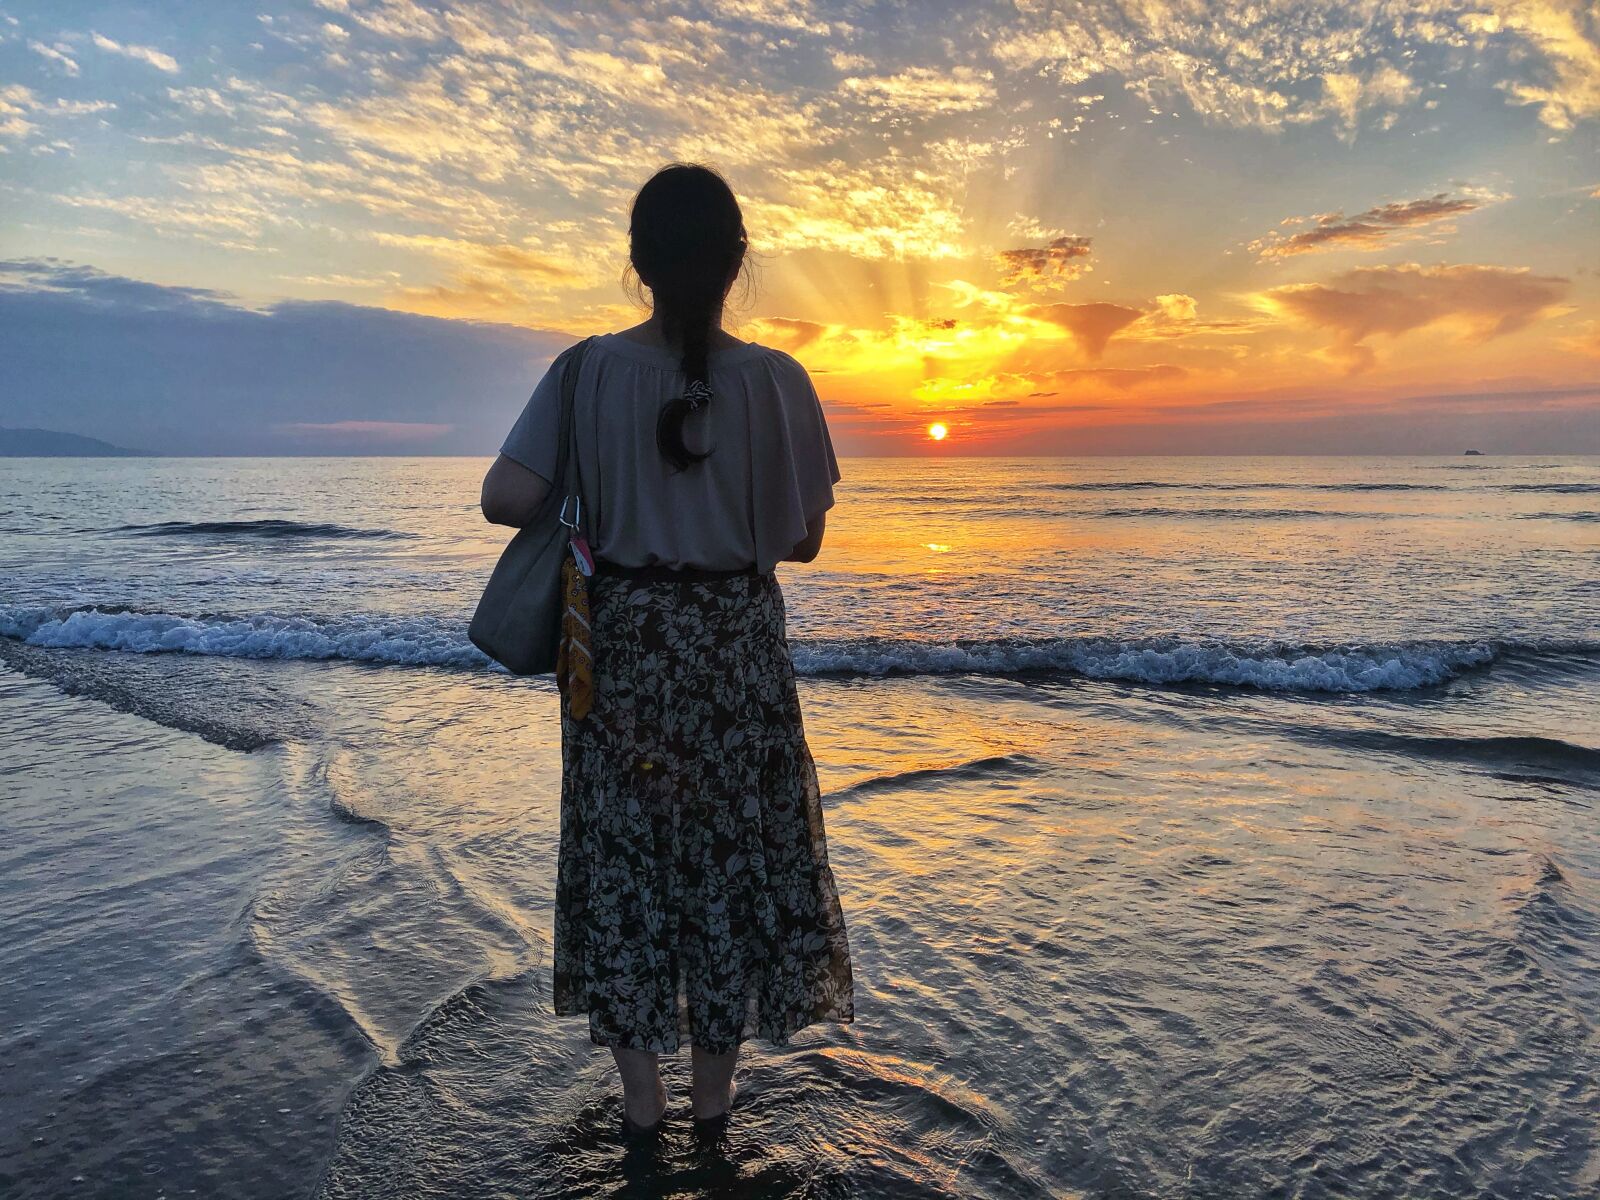 Apple iPhone 8 Plus + iPhone 8 Plus back dual camera 3.99mm f/1.8 sample photo. Woman, sunset, silhouette photography